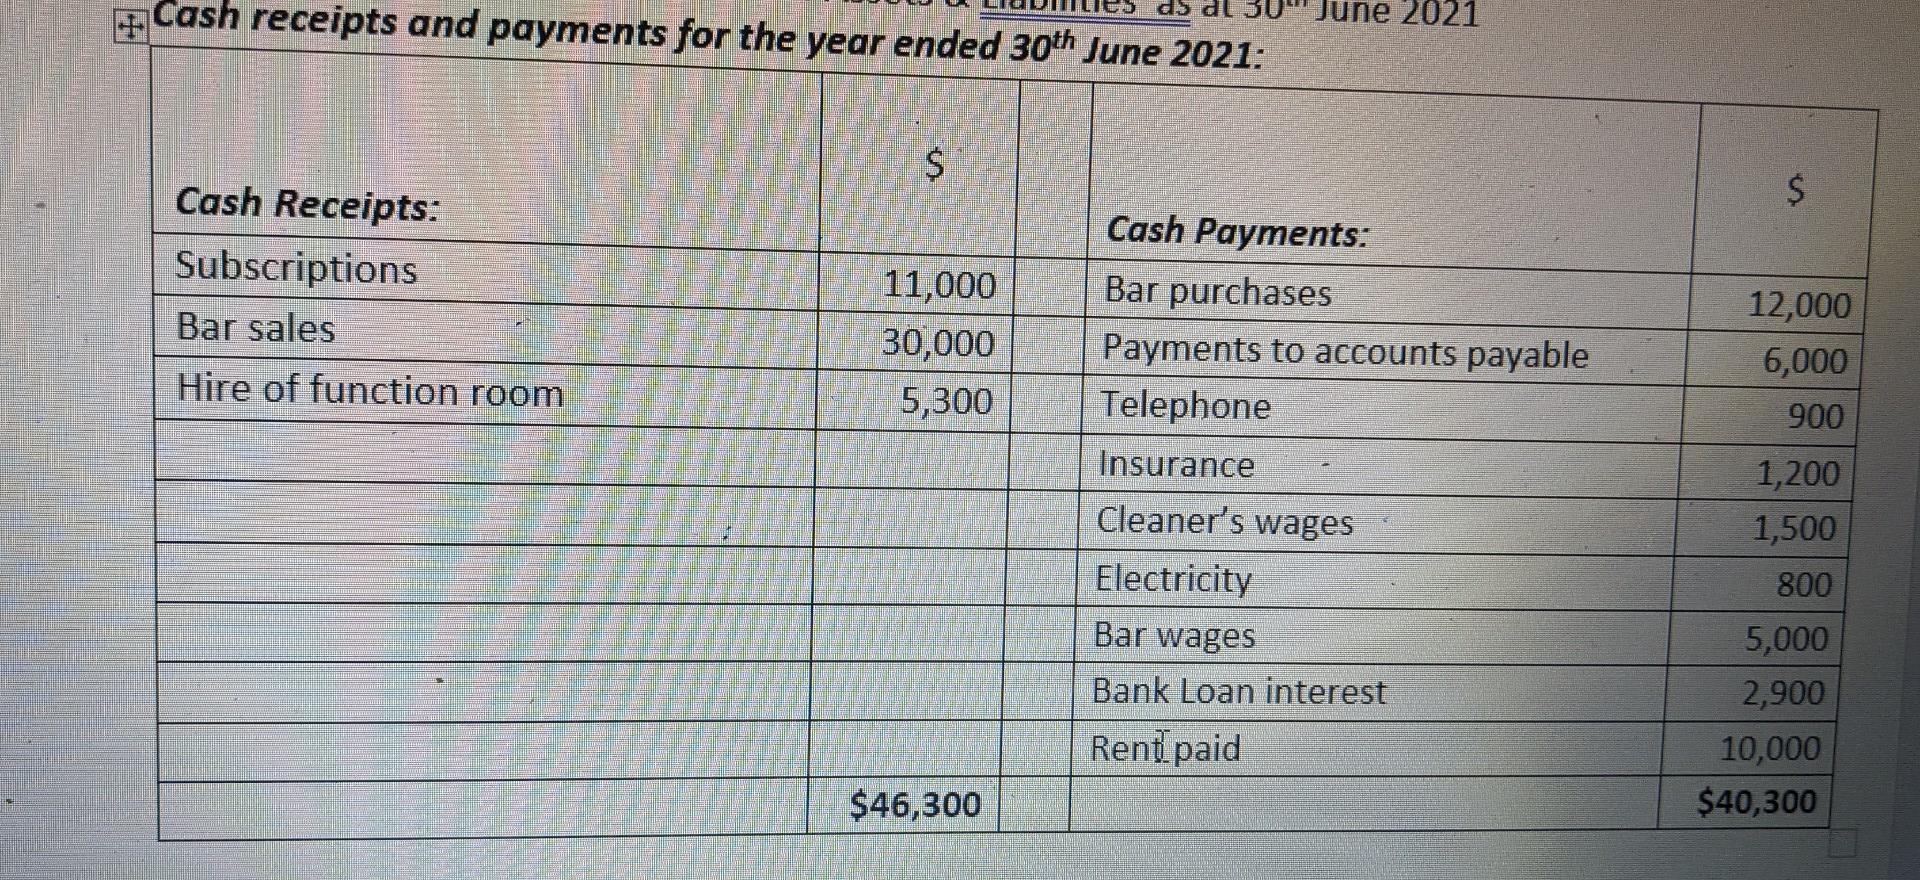 Cash receipts and payments for the year ended 30th June 2021: d5 dl June 2021 S$ Cash Receipts: Subscriptions Bar sales Hire